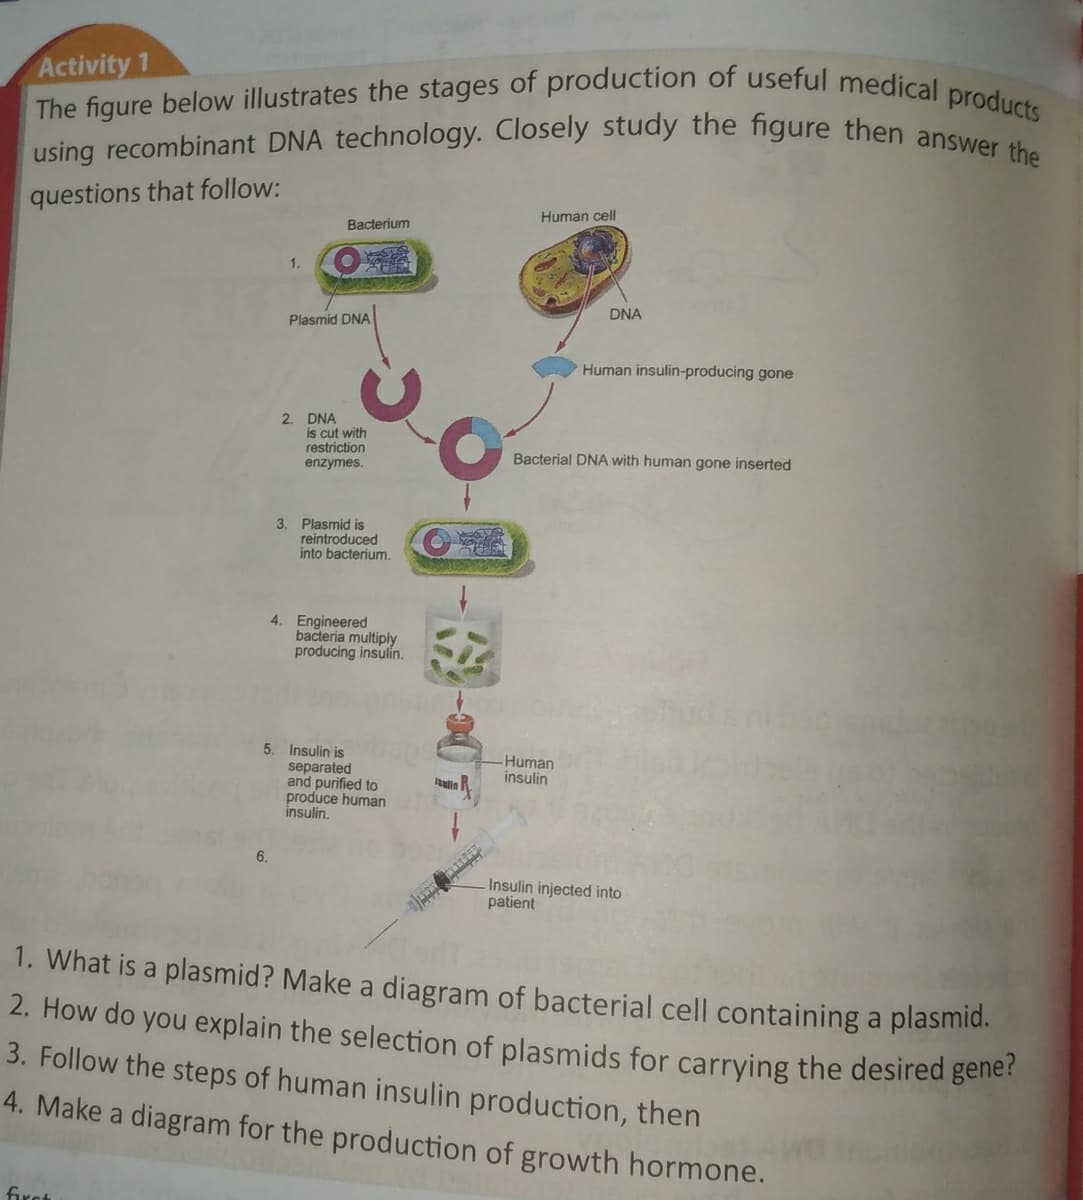 The figure below illustrates the stages of production of useful medical products
using recombinant DNA technology. Closely study the figure then answer the
Activity 1
questions that follow:
Human cell
Bacterium
1.
DNA
Plasmid DNA
Human insulin-producing gone
2. DNA
is cut with
restriction
Bacterial DNA with human gone inserted
enzymes.
3. Plasmid is
reintroduced
into bacterium.
4. Engineered
bacteria multiply
producing insulin.
5. Insulin is
Human
insulin
separated
and purified to
produce human
insulin.
6.
Insulin injected into
patient
1. What is a plasmid? Make a diagram of bacterial cell containing a plasmid.
2. How do you explain the selection of plasmids for carrying the desired gener
3. Follow the steps of human insulin production, then
4. Make a diagram for the production of growth hormone.
first
